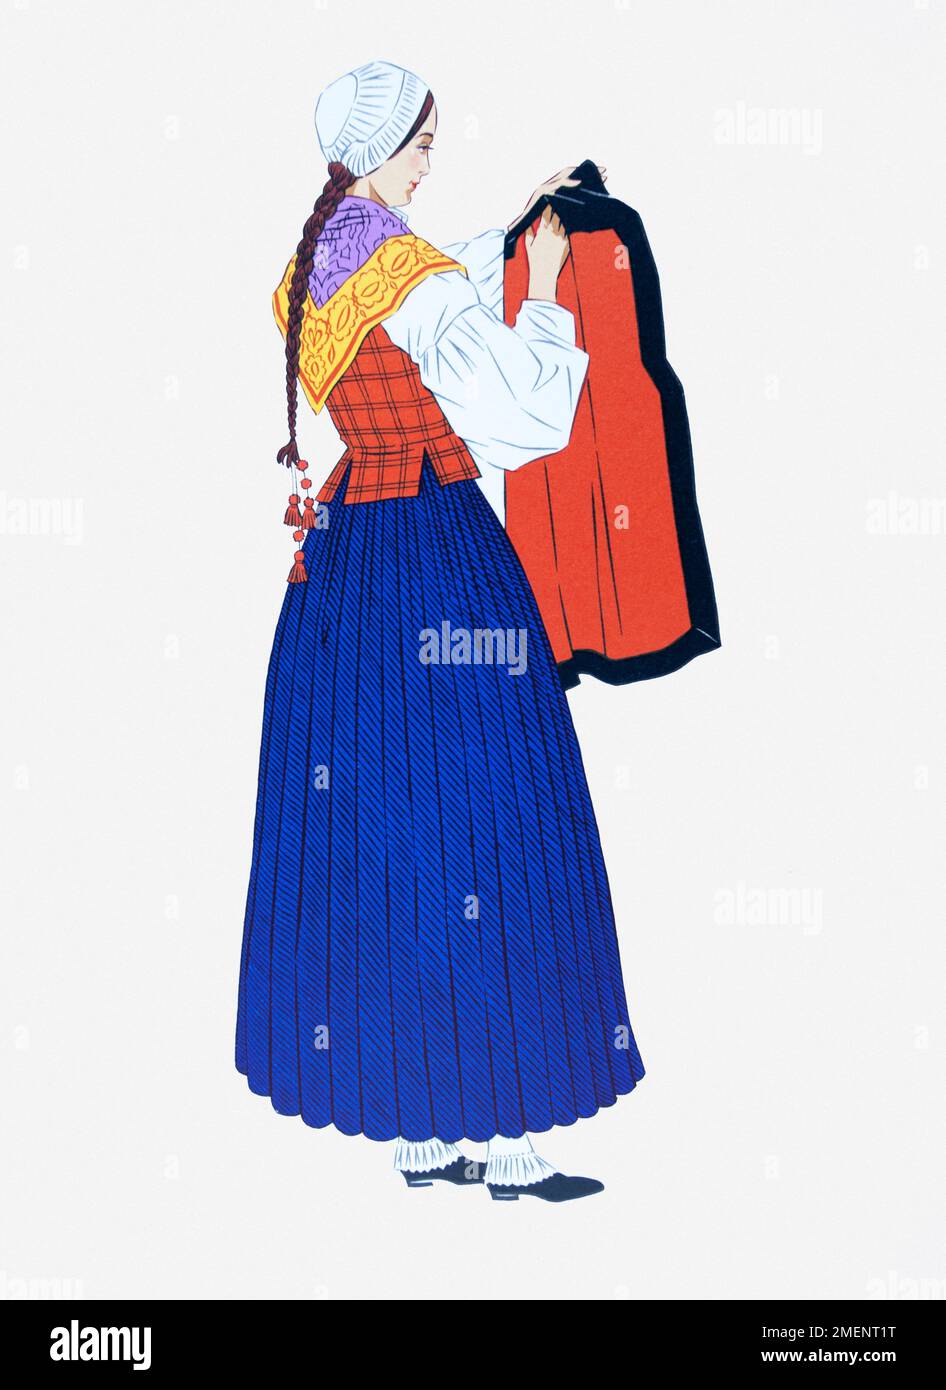 Illustration of woman wearing traditional costume from French Pyrenees  region Stock Photo - Alamy